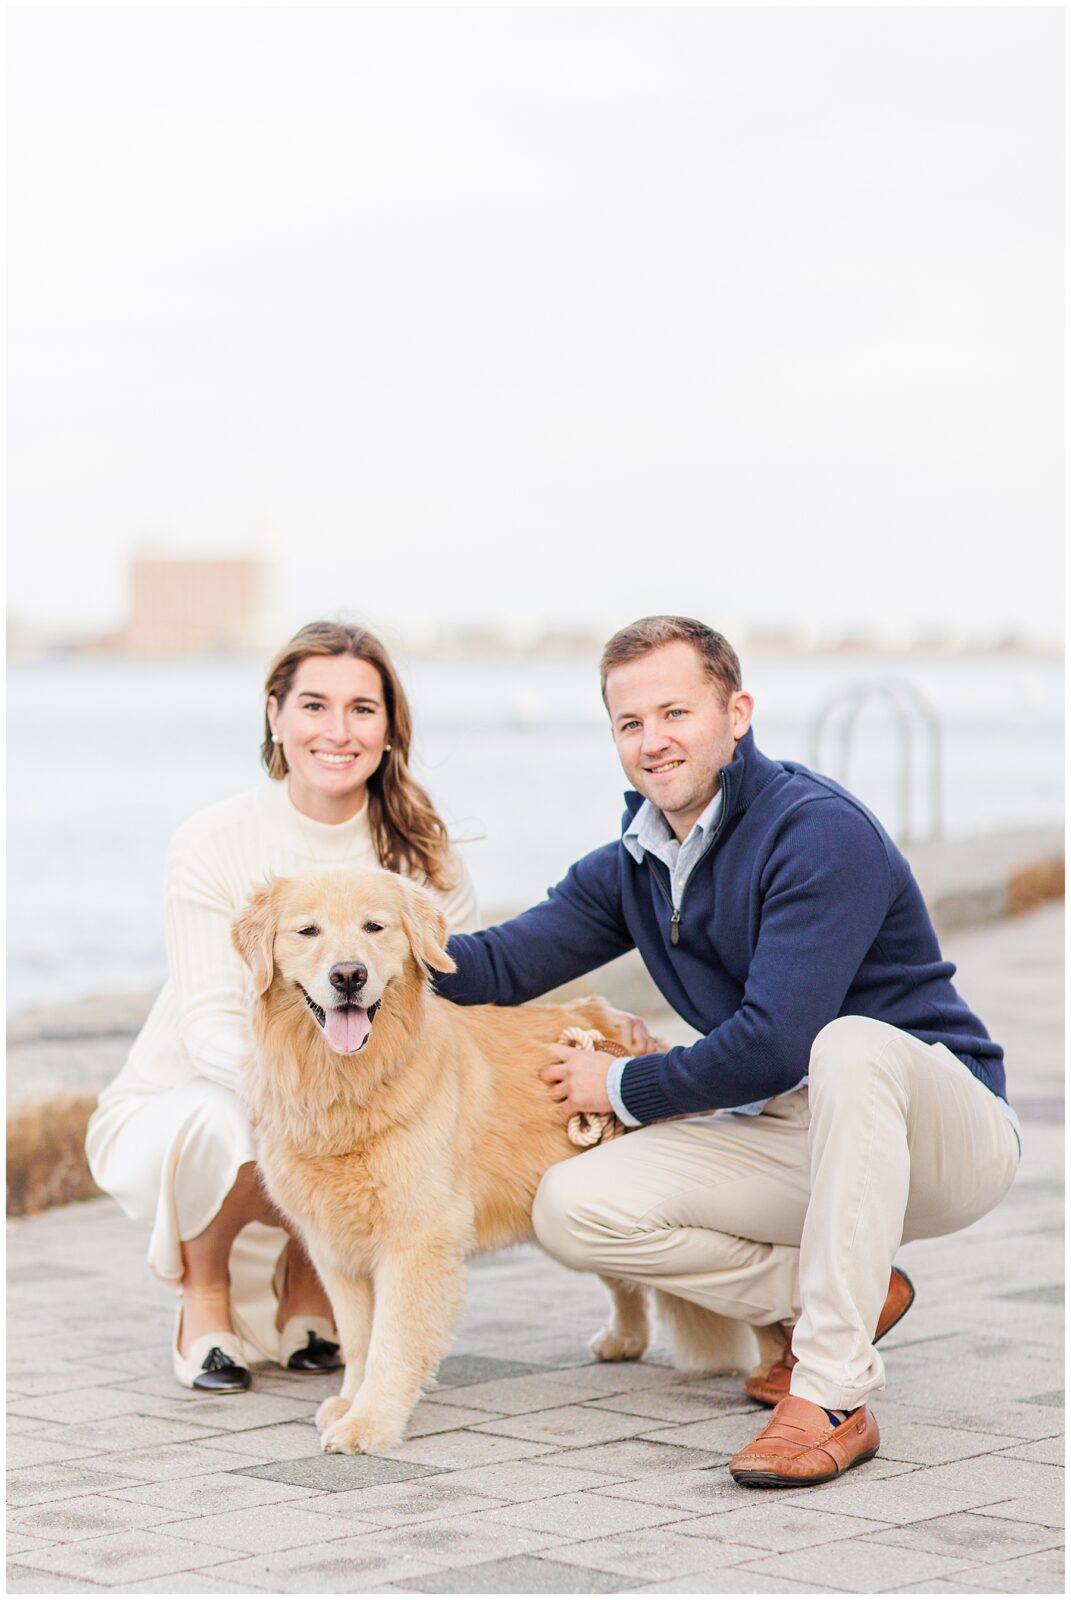 Couple sitting with their golden retriever dog during engagement session.